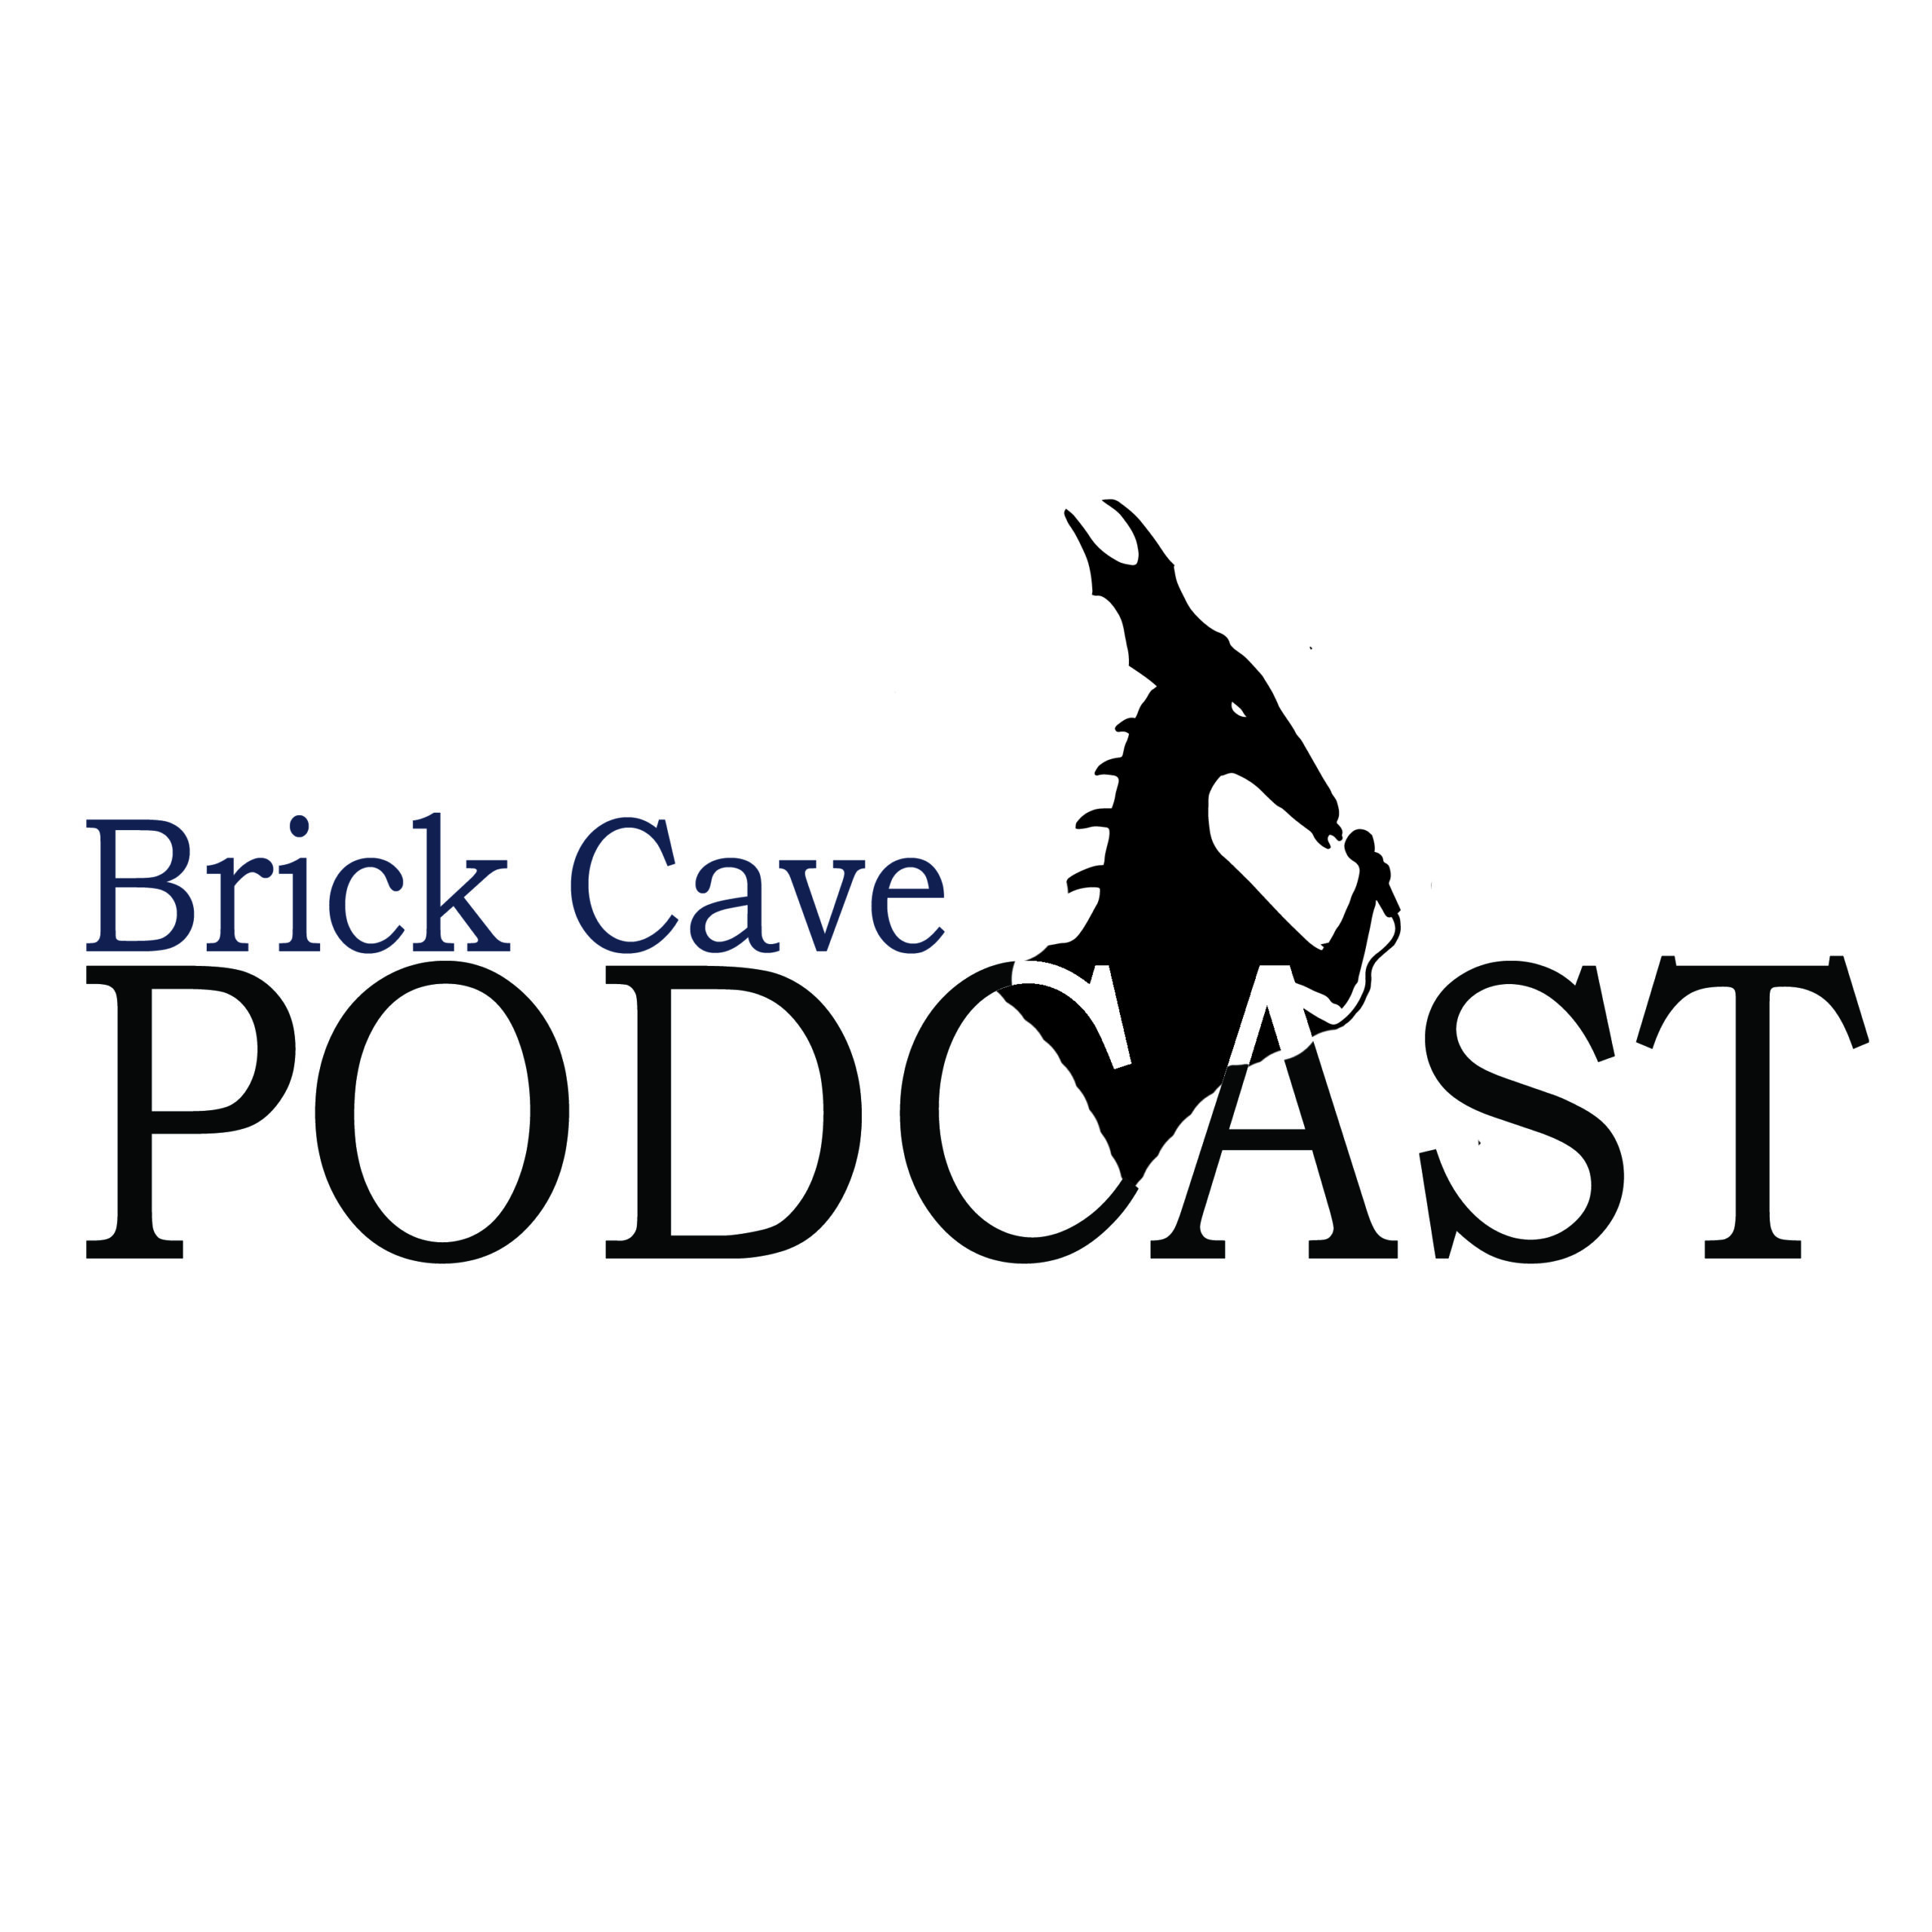 Joe Appearing on the Brick Cave Podcast